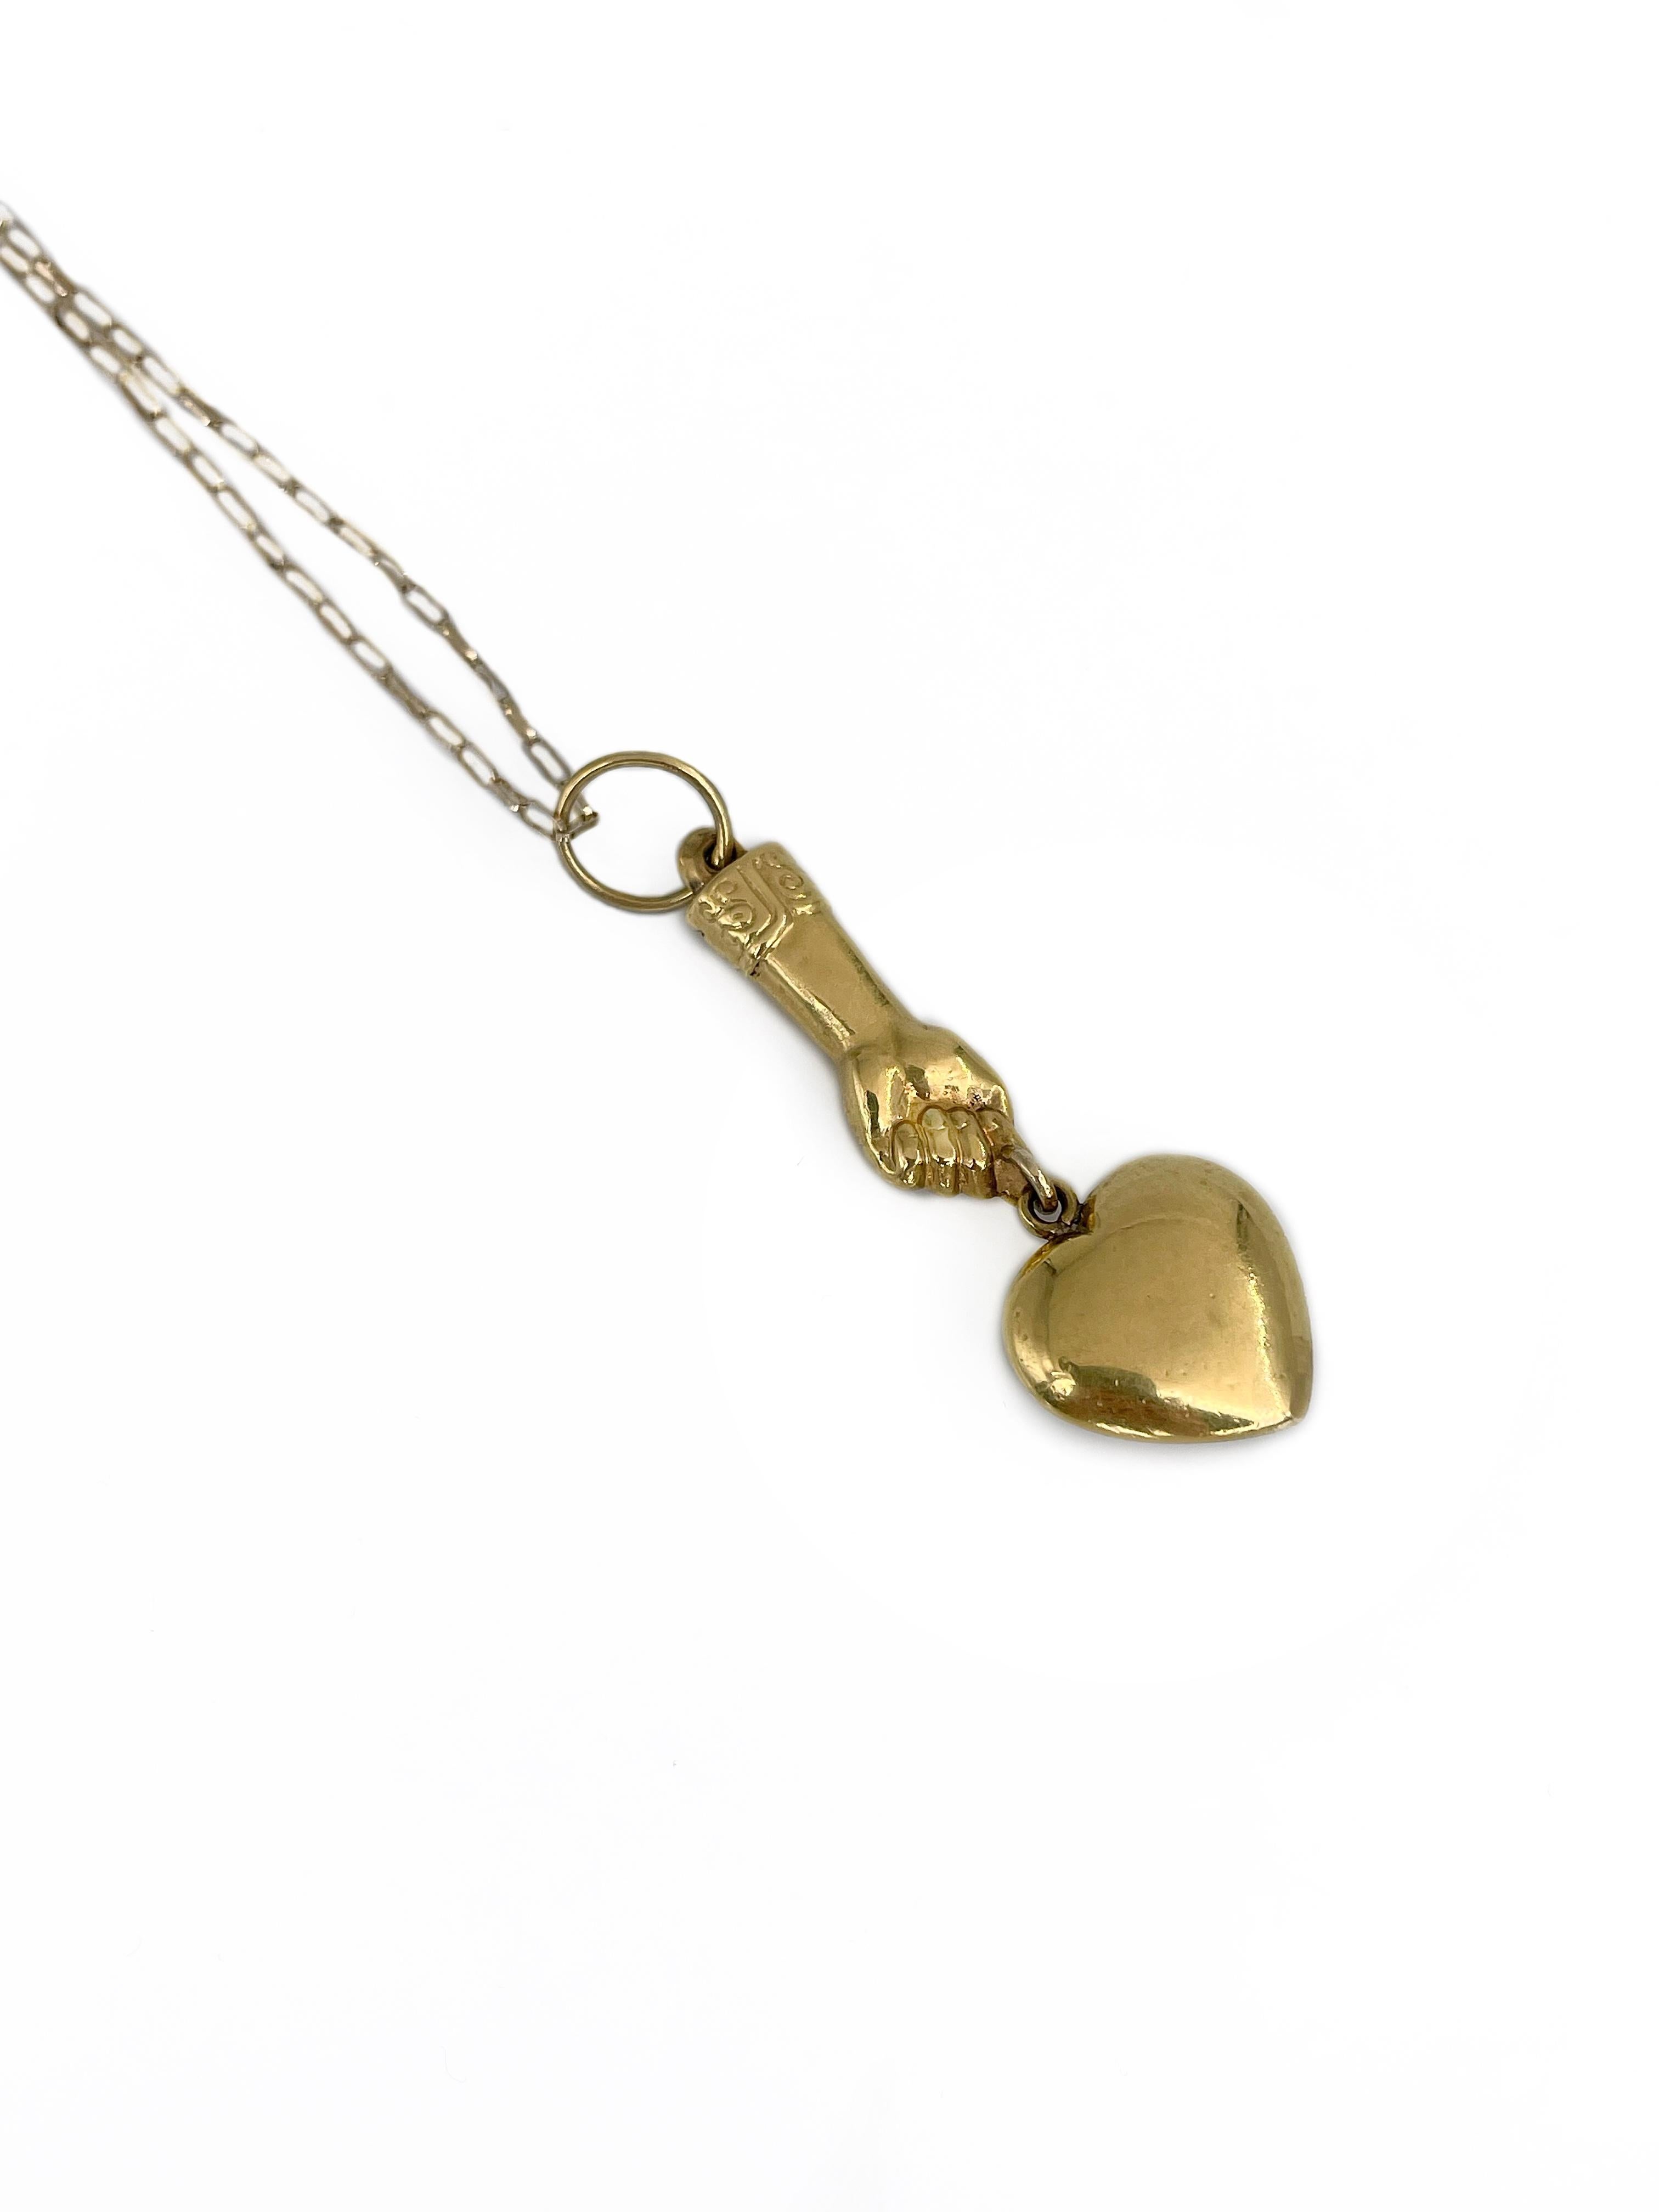 Women's Victorian 14 Karat Gold Mano Figa Holding Heart Agate Pendant Chain Necklace For Sale